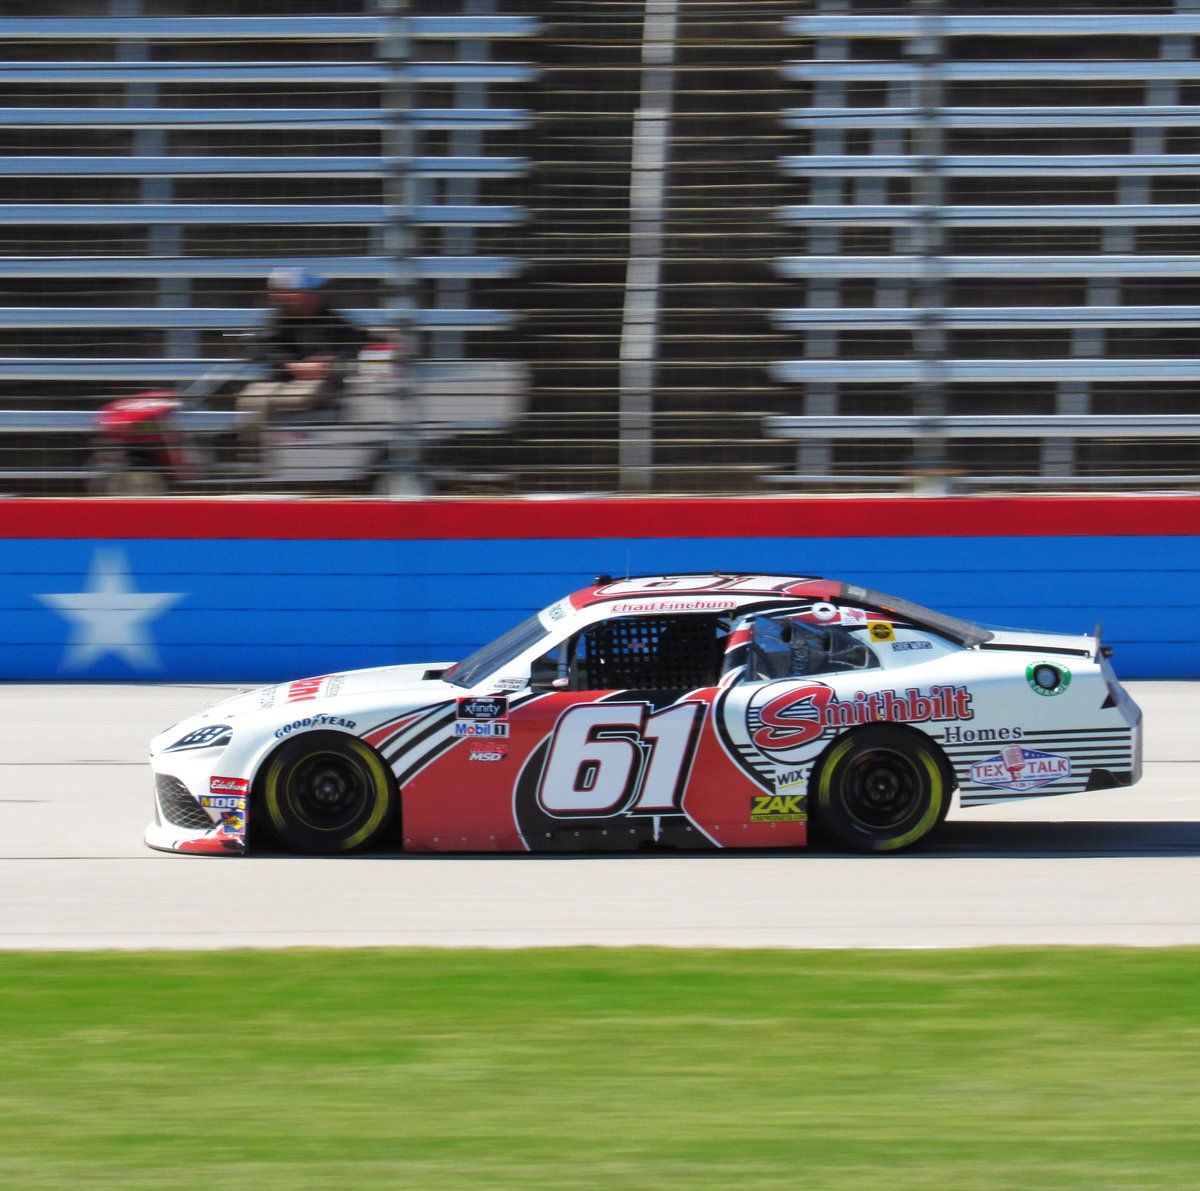 .@ChadFinchum has recorded multiple @NASCAR_Xfinity Top 20s @TXMotorSpeedway with MBM, including his first @XfinityRacing Top 15 on a non-superspeedway. Looking forward to a great weekend in the Lone Star state! #NASCAR